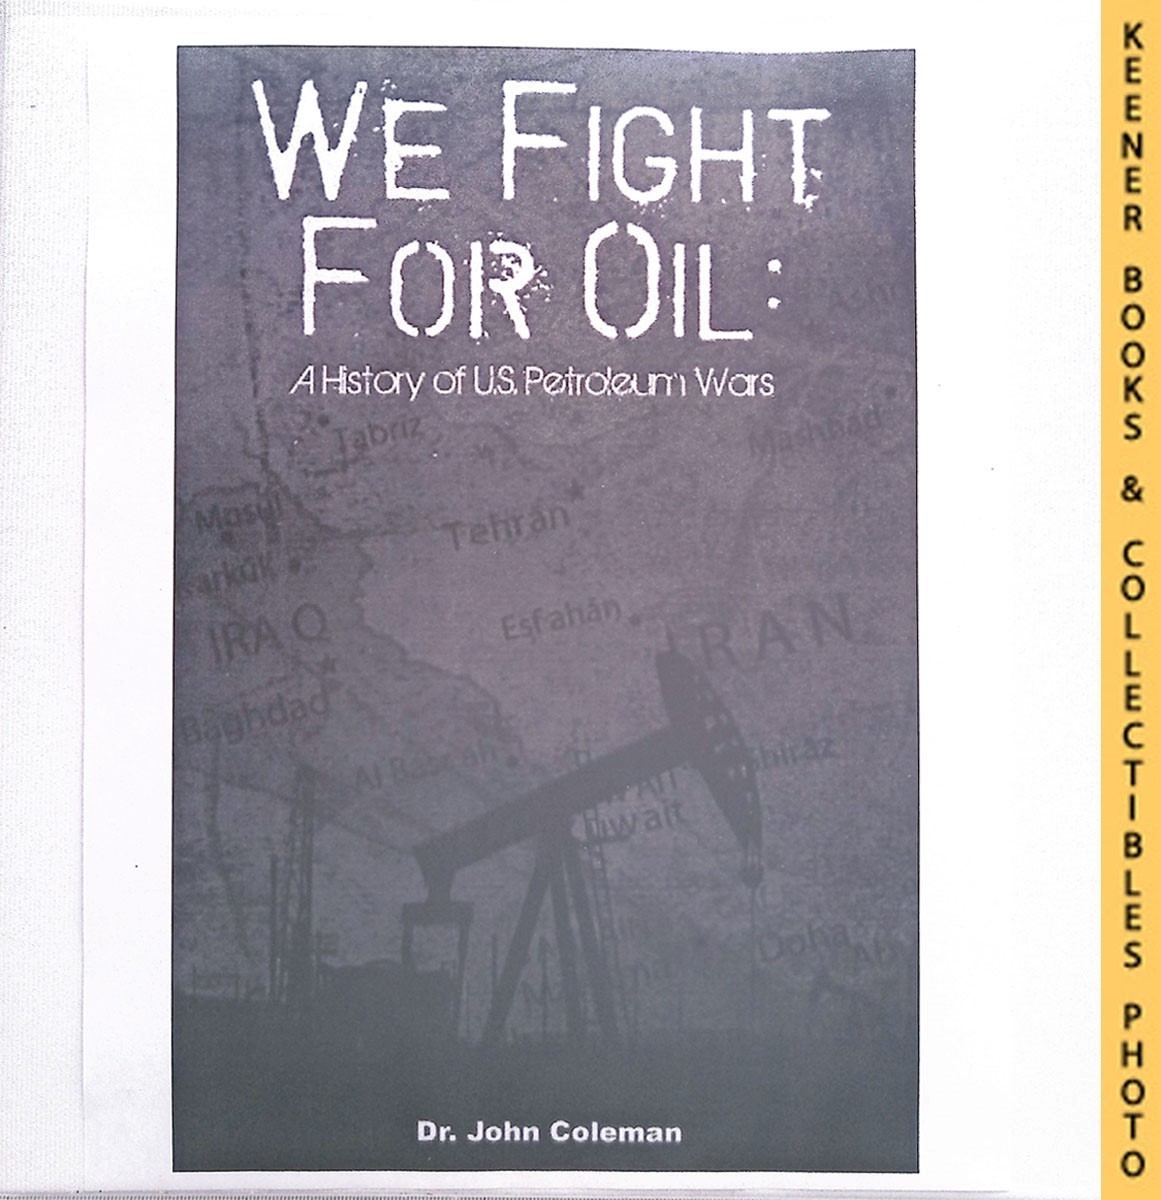 COLEMAN, DR. JOHN - We Fight for Oil : A History of U.S. Petroleum Wars